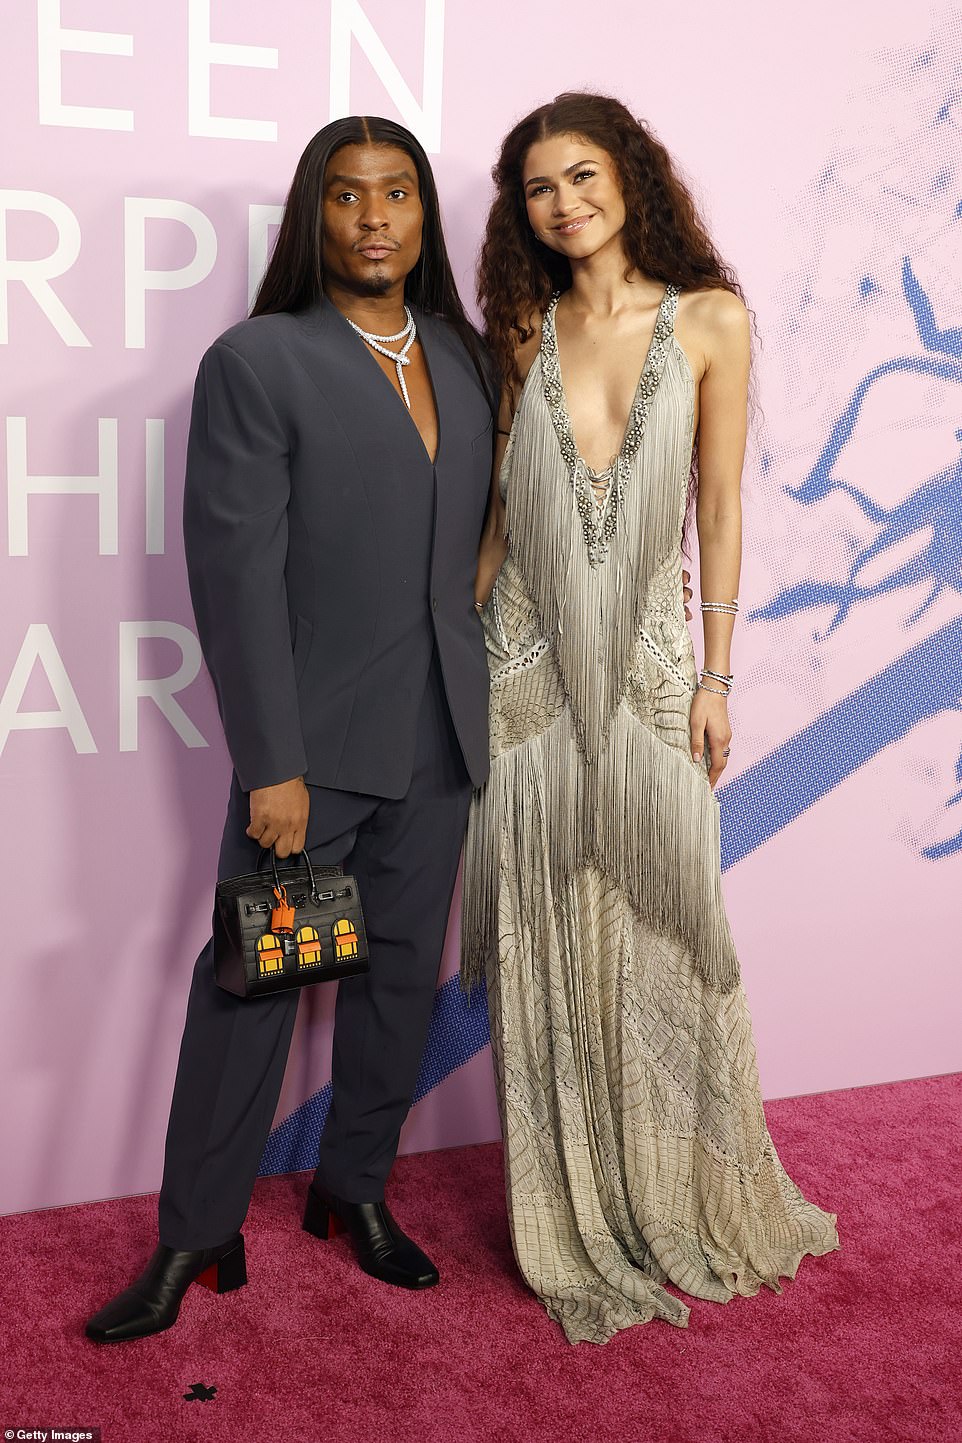 During the event, Zendaya was accompanied by her stylist Law Roach, 45, who looked dapper in a gray suit.